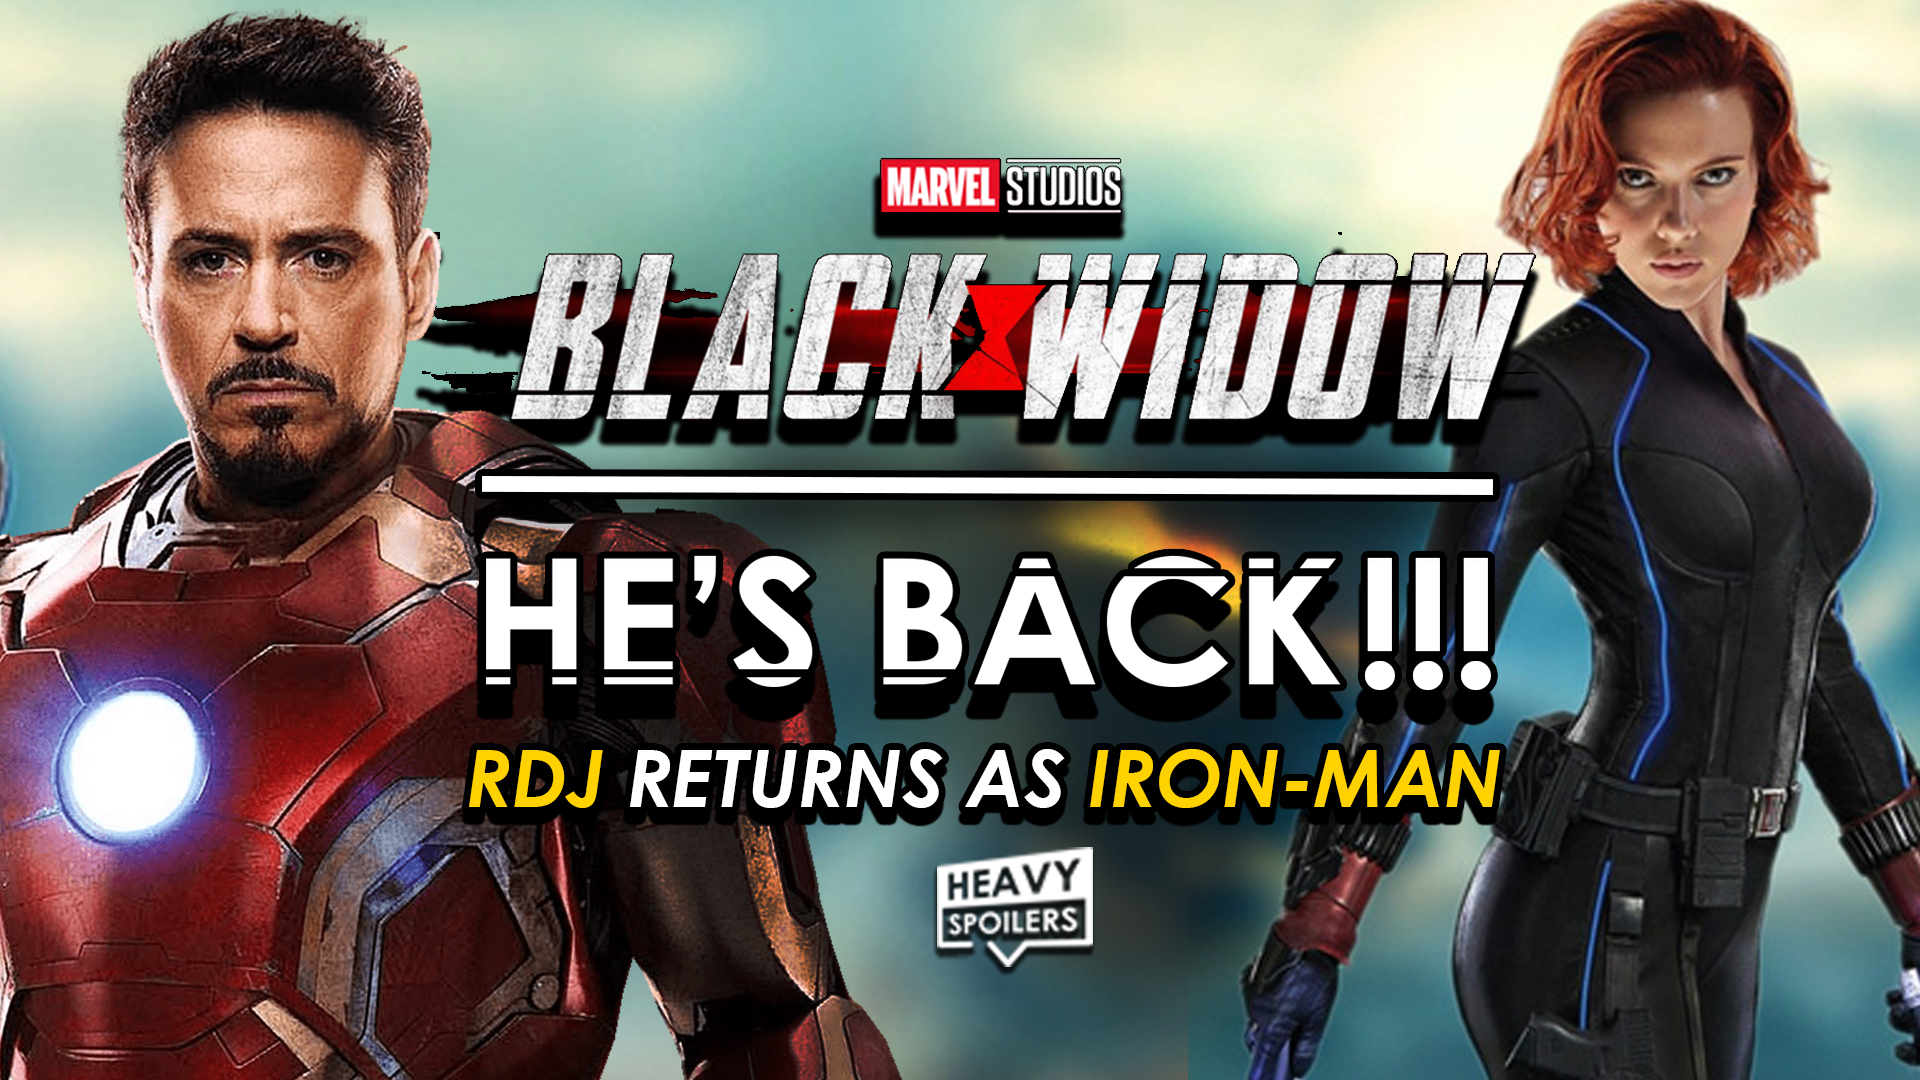 robert downey junior officially returning as iron man tony stark for 2020 black widow marvel mcu movie breaking news confirmed explained everything we know so far